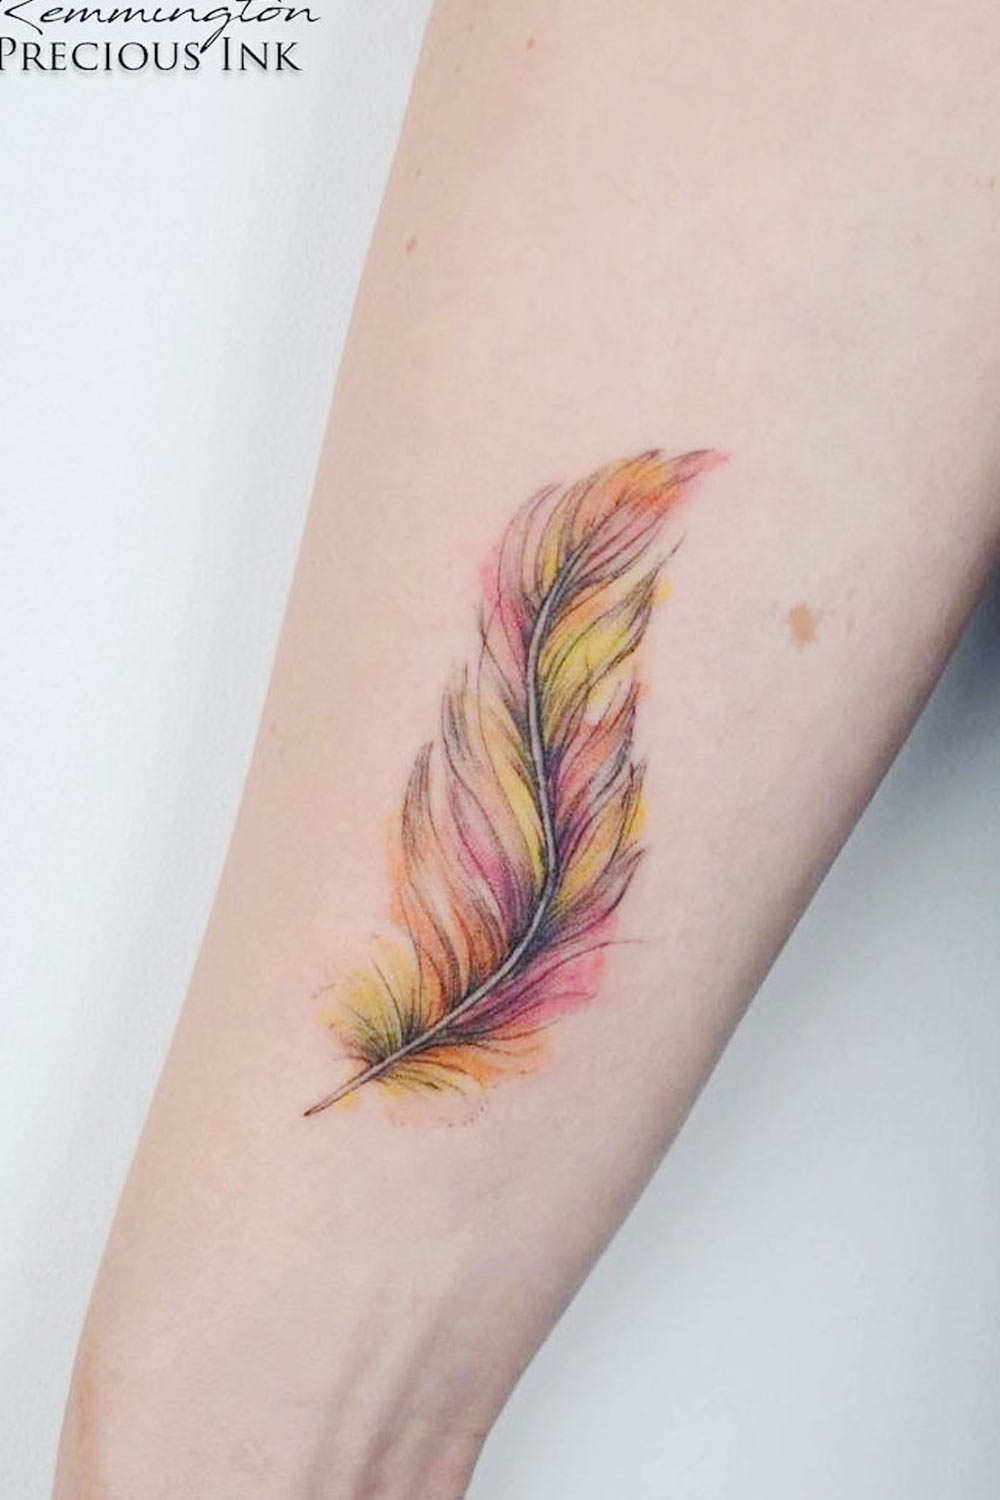 Ink Empire Tattoos - Custom Watercolor Feather to Represent The Trans Flag  🔴🔵 by Artist / Stax 💉 DM for Consultations and Bookings🏛 #watercolor # tattoo #feather #trans #lgbtq #awareness #onelove #colortattoos  #tattooideas #